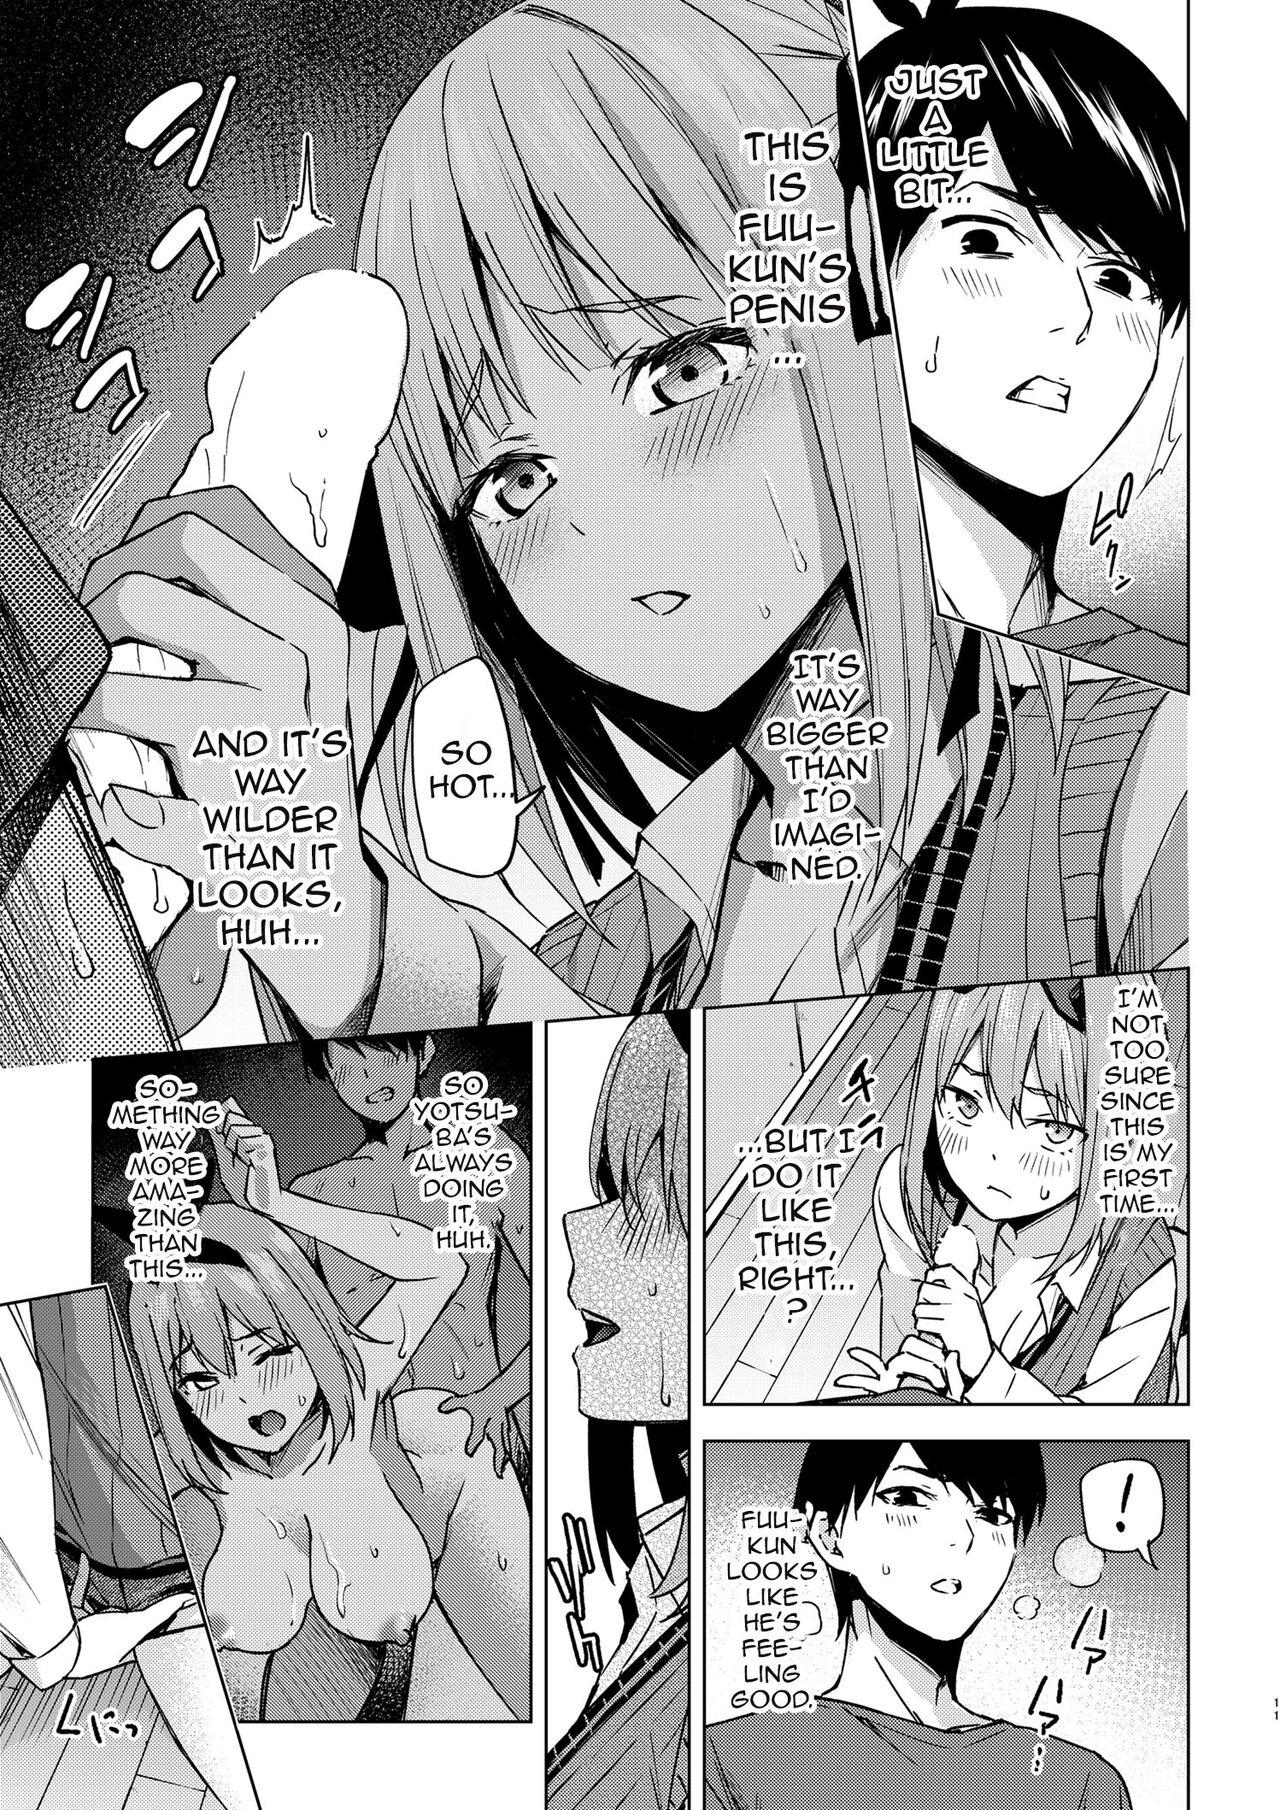 Pink Ichinengo no Itazura | Fooling Around, One Year Later - Gotoubun no hanayome | the quintessential quintuplets Role Play - Page 10